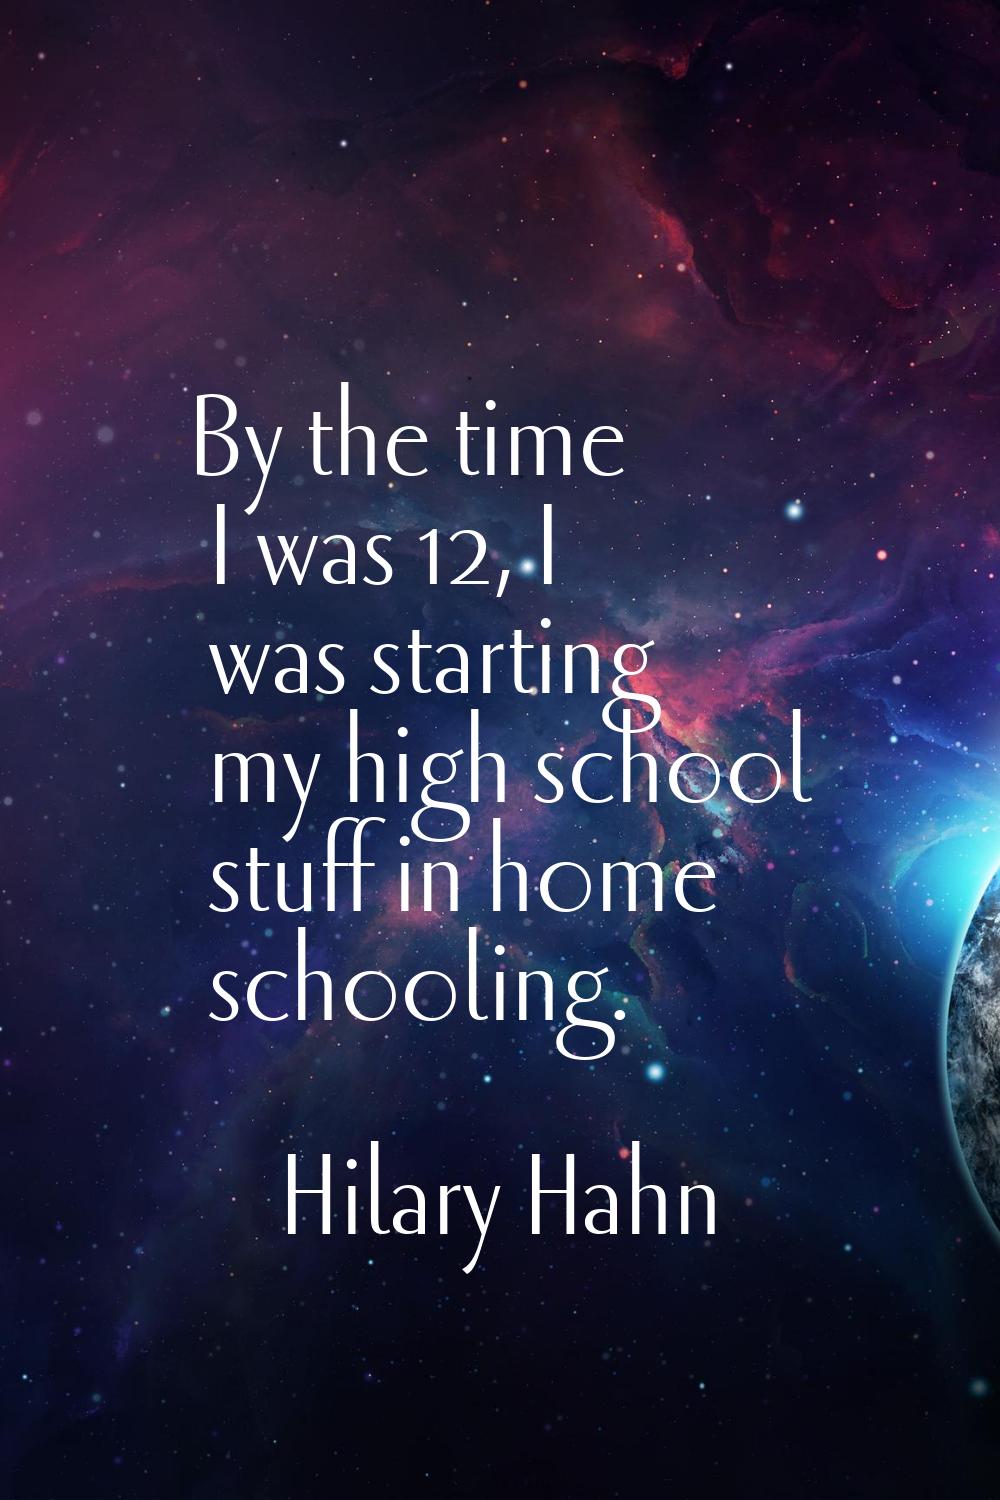 By the time I was 12, I was starting my high school stuff in home schooling.